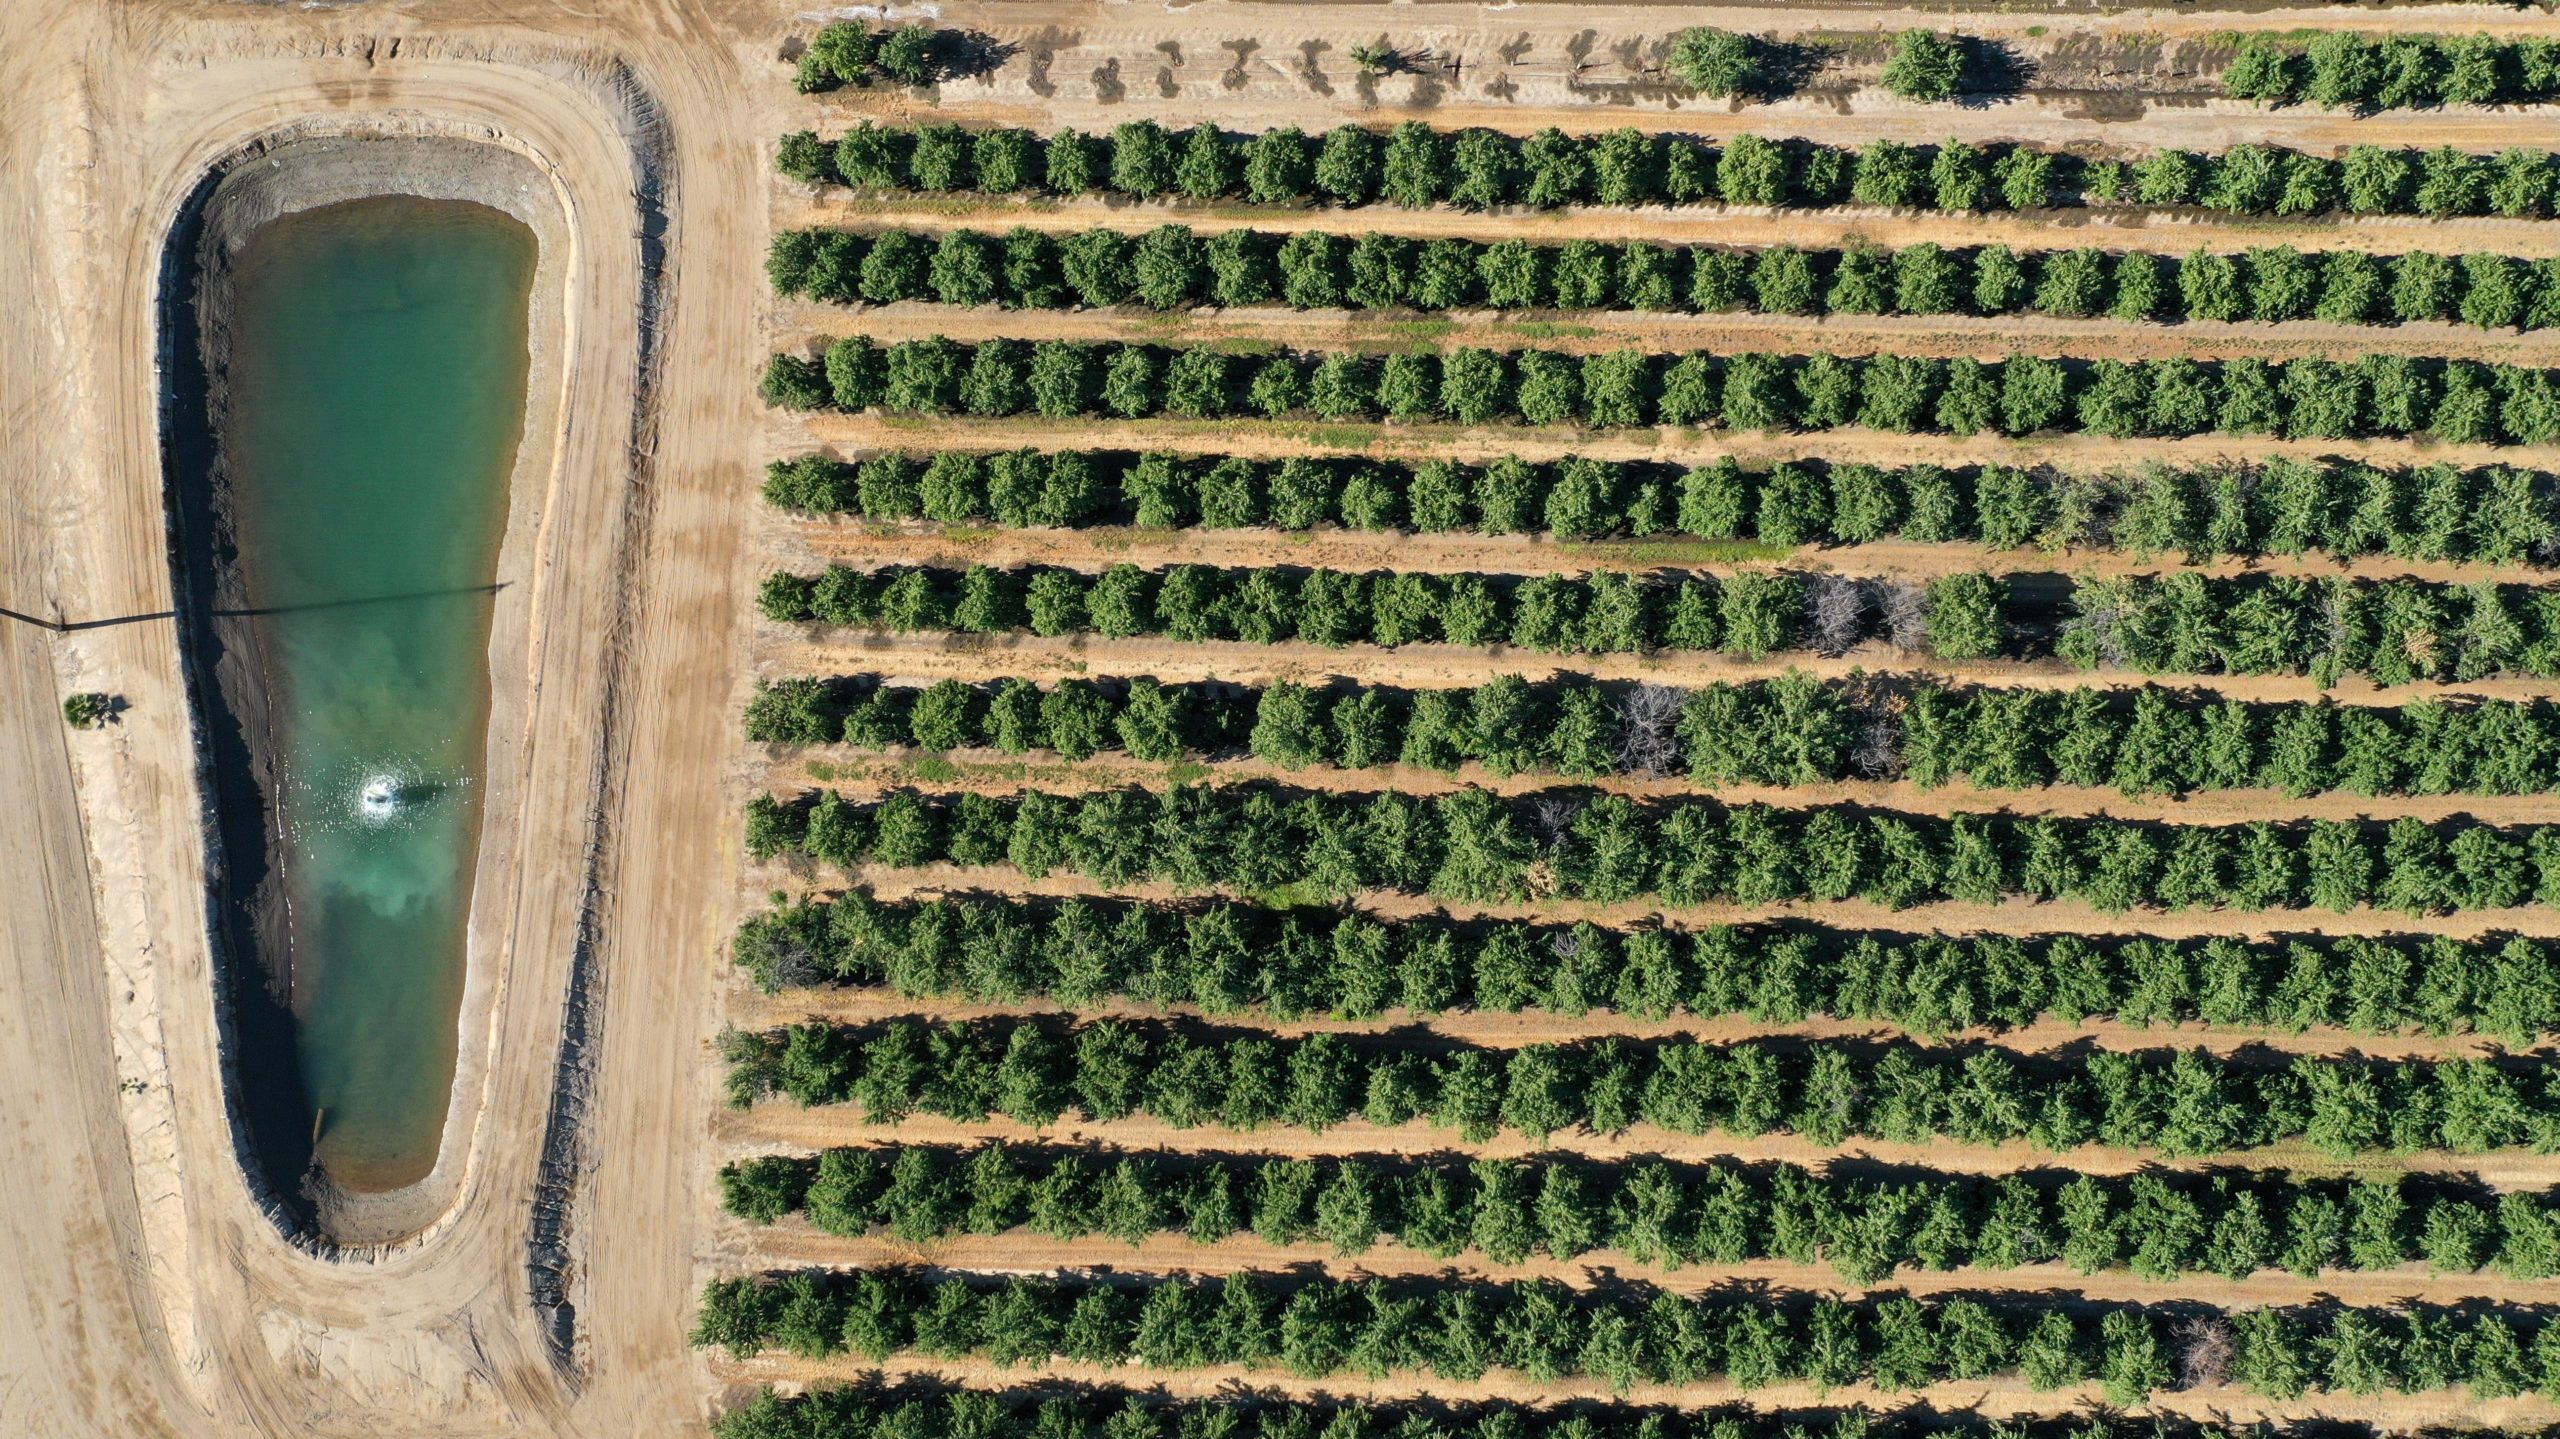 An irrigation pond next to an almond orchard in Chowchilla, California. (Photo: Justin Sullivan, Getty Images)